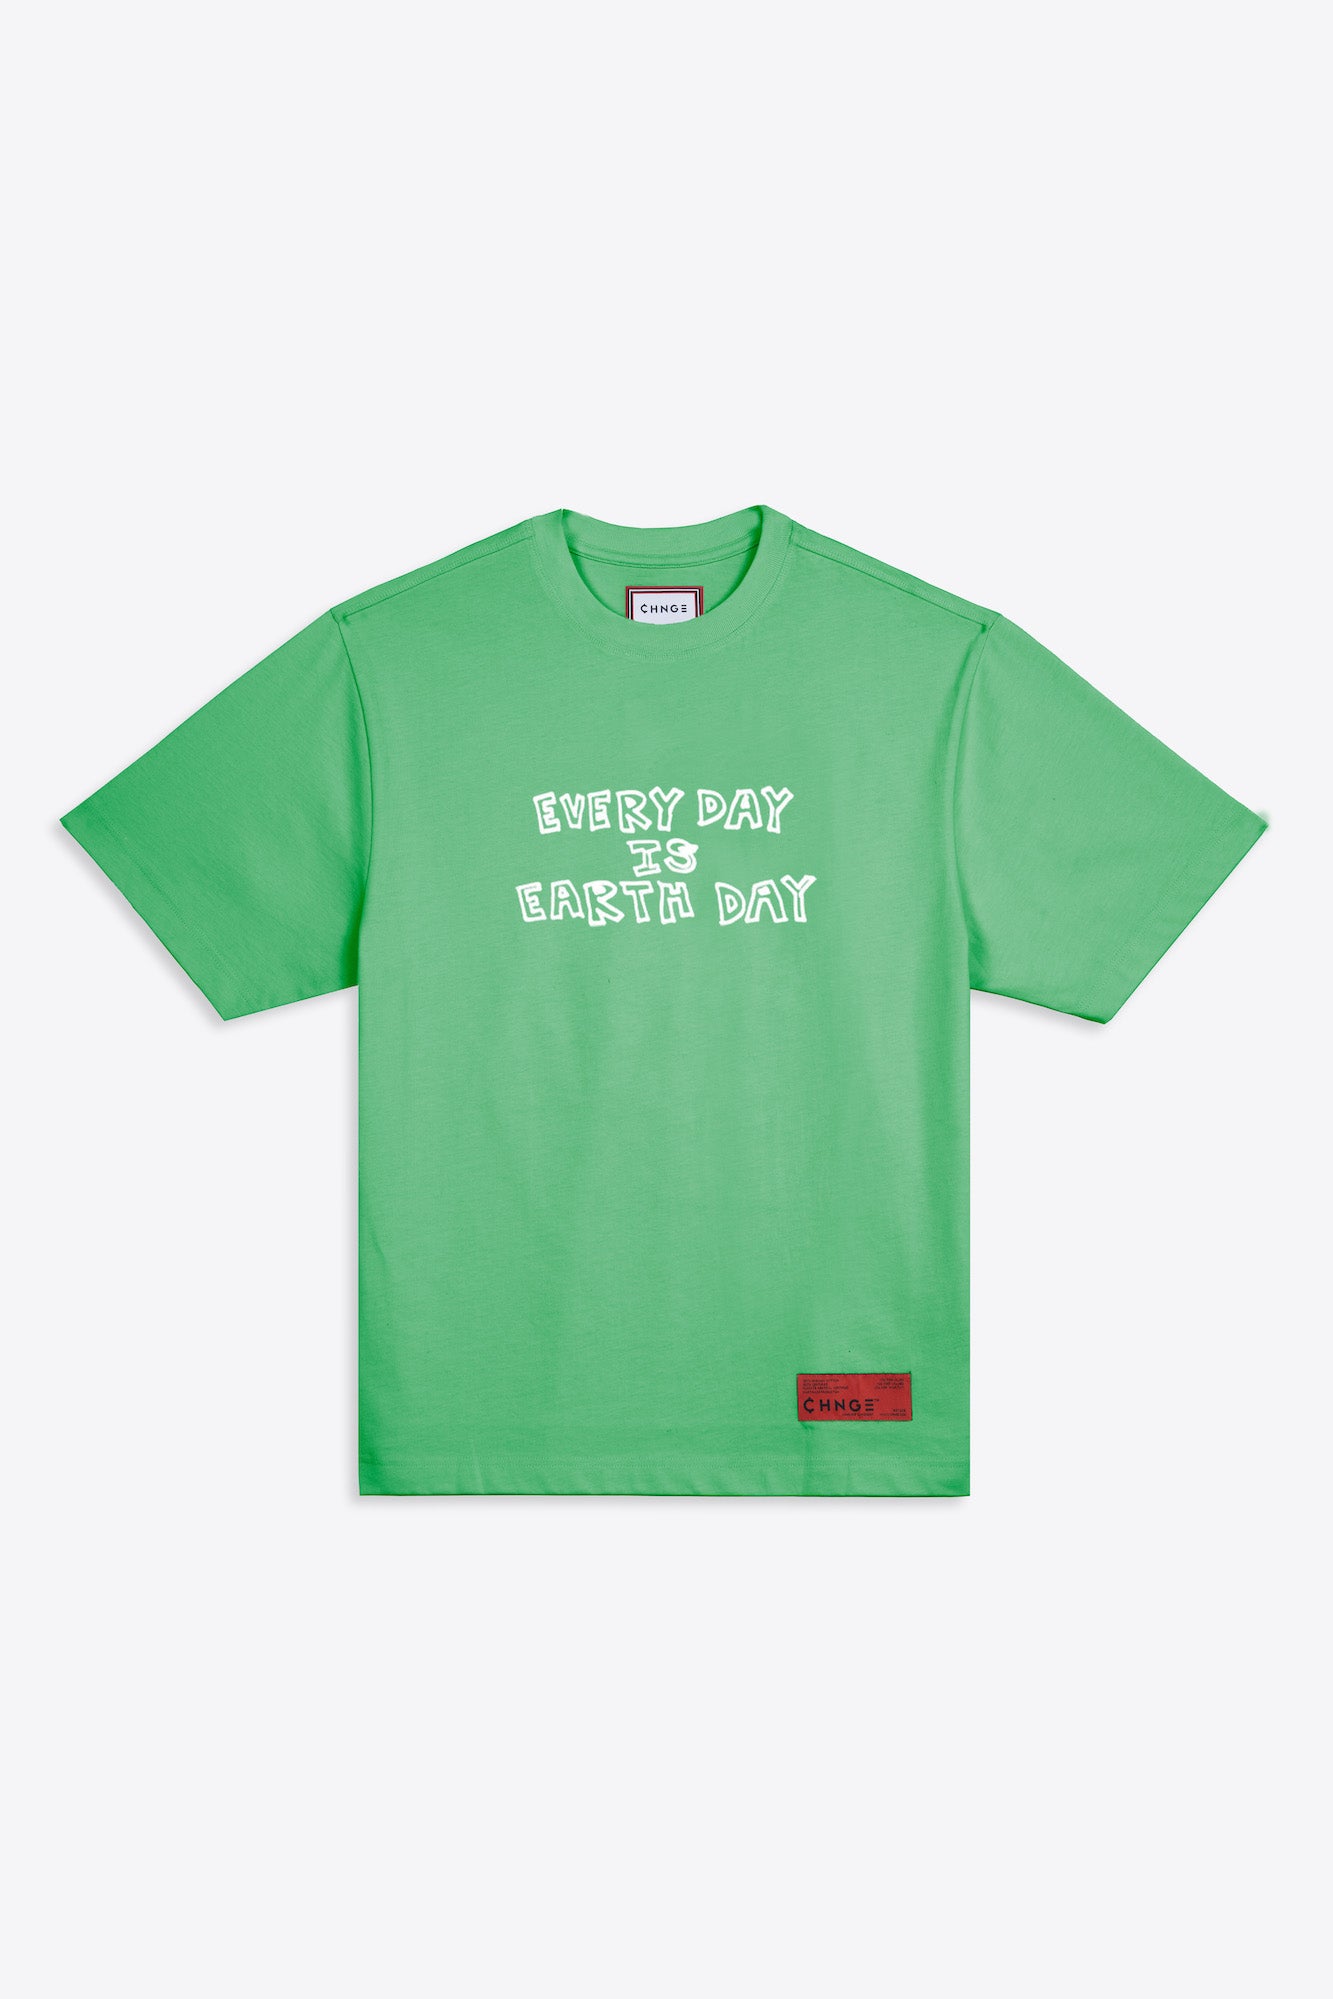 Every Day Earth Day Green) S/S (Kelly $42 T-Shirt